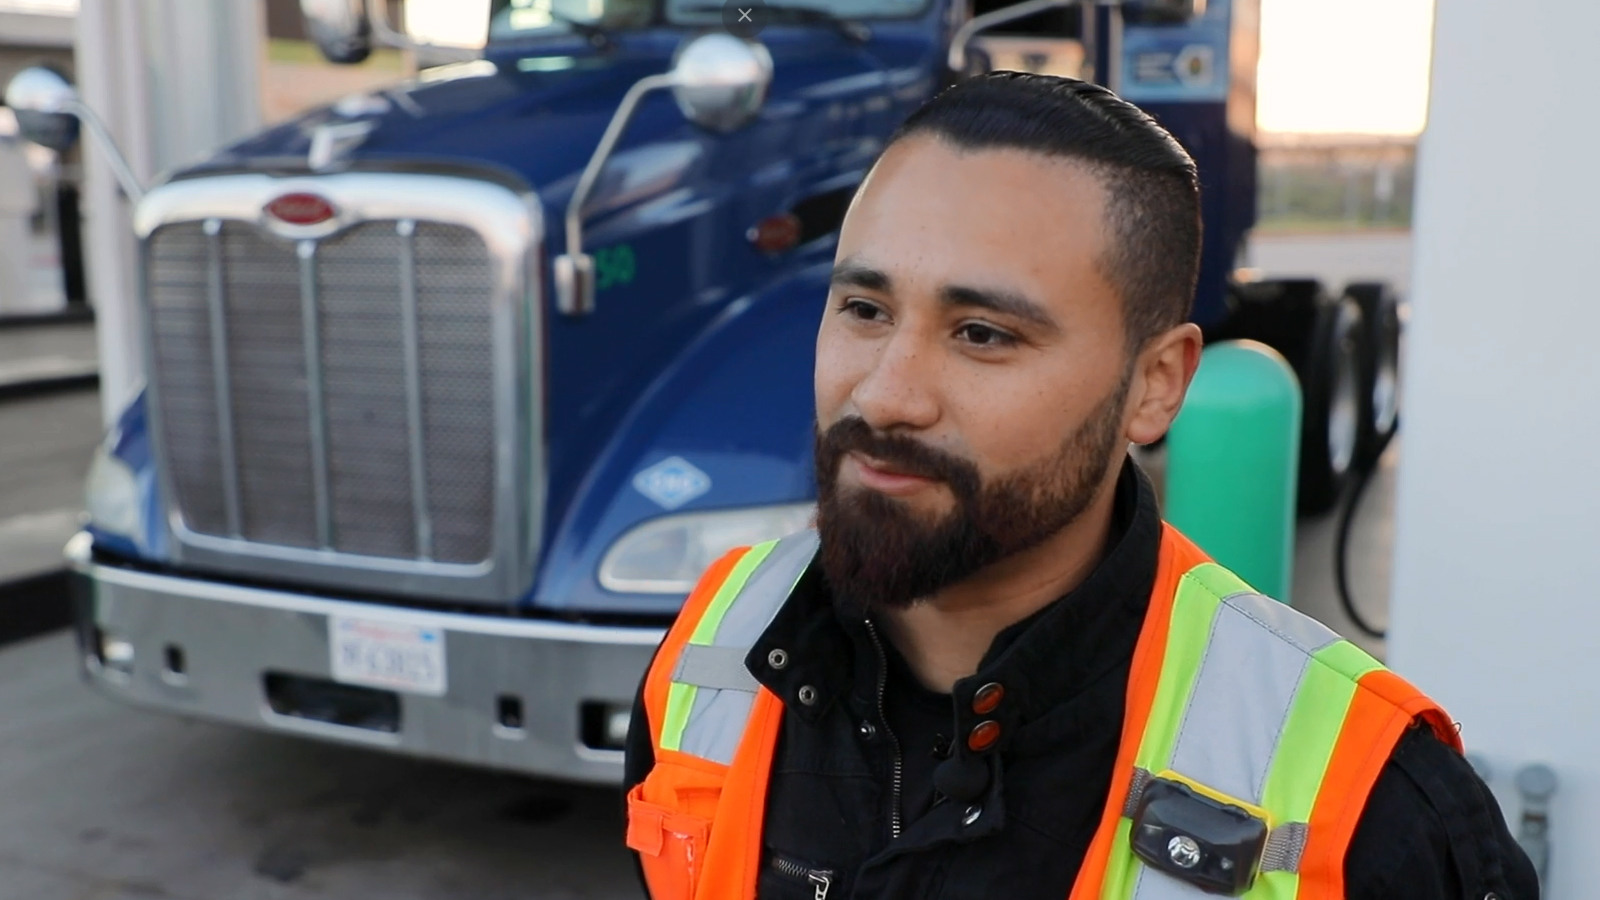 What Do Drivers Say About Today’s Natural Gas Trucks?